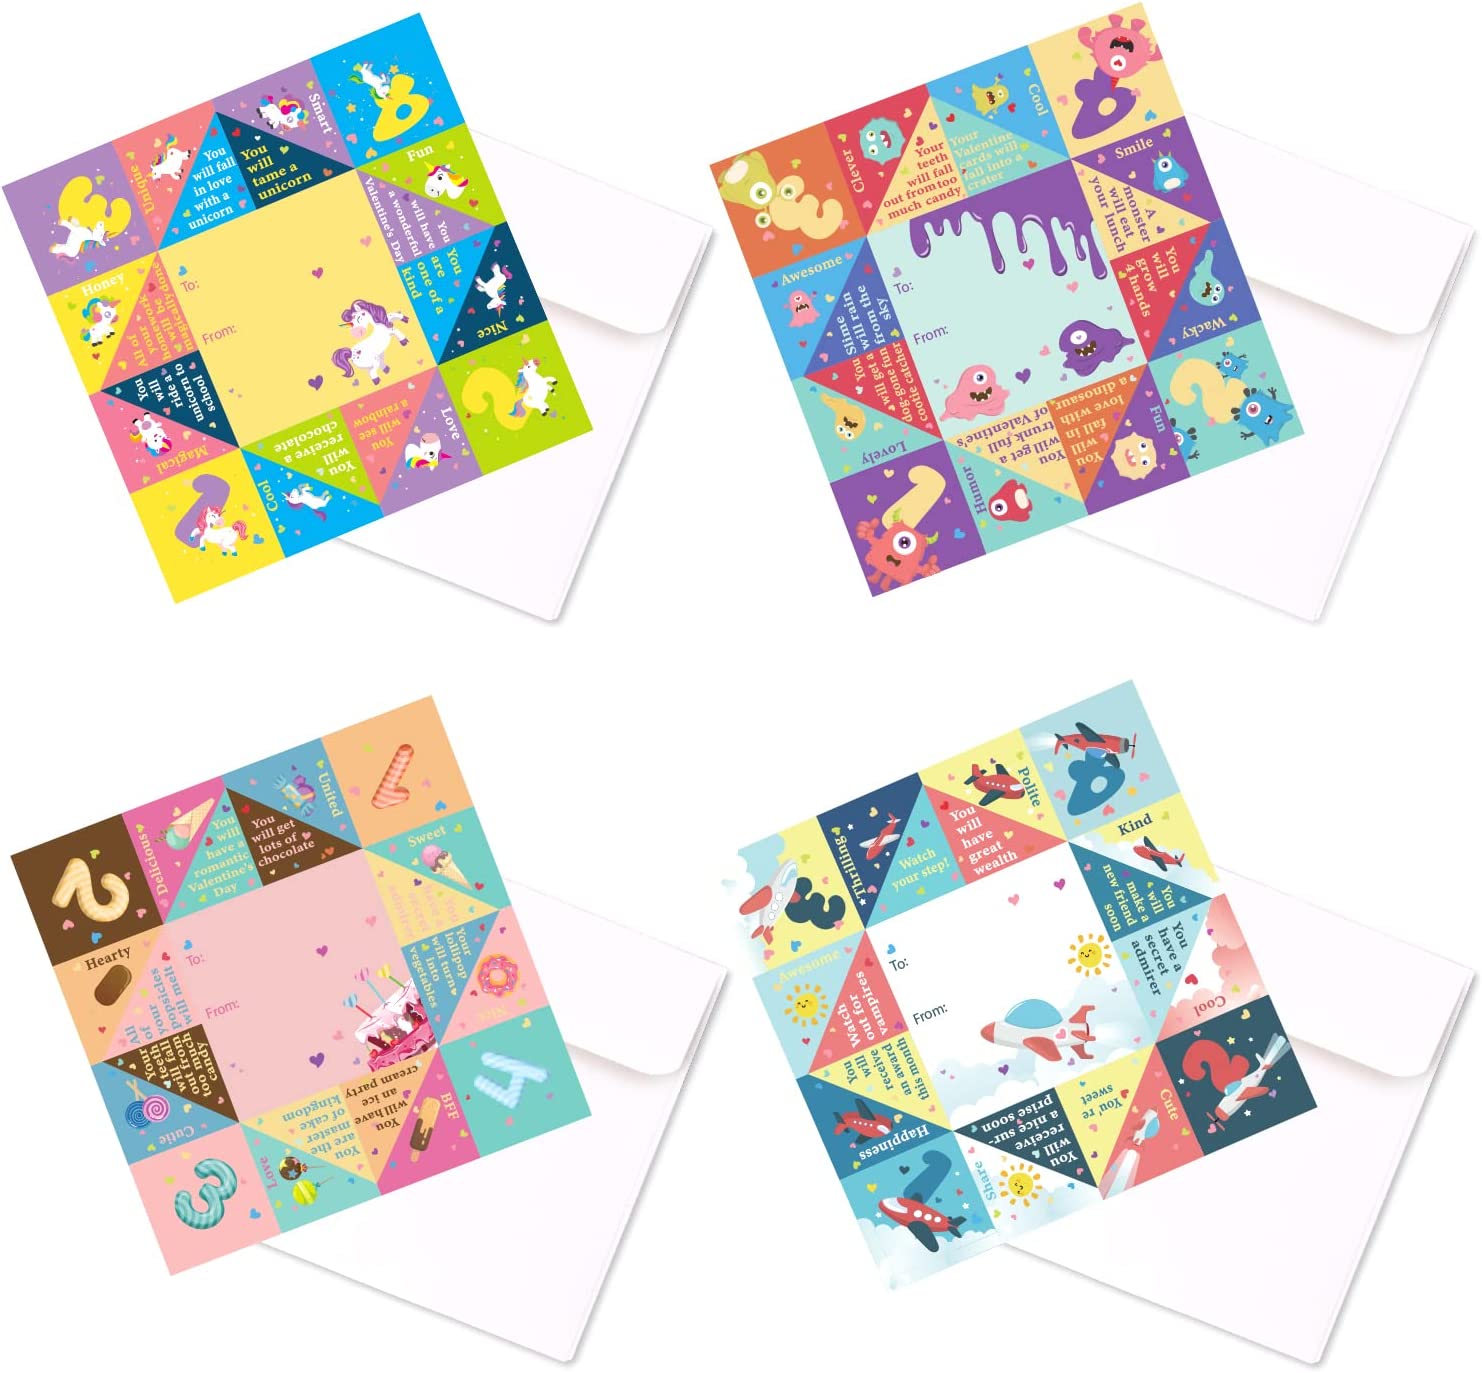 28 Cootie Catcher Valentine's Cards with Envelopes for Kids